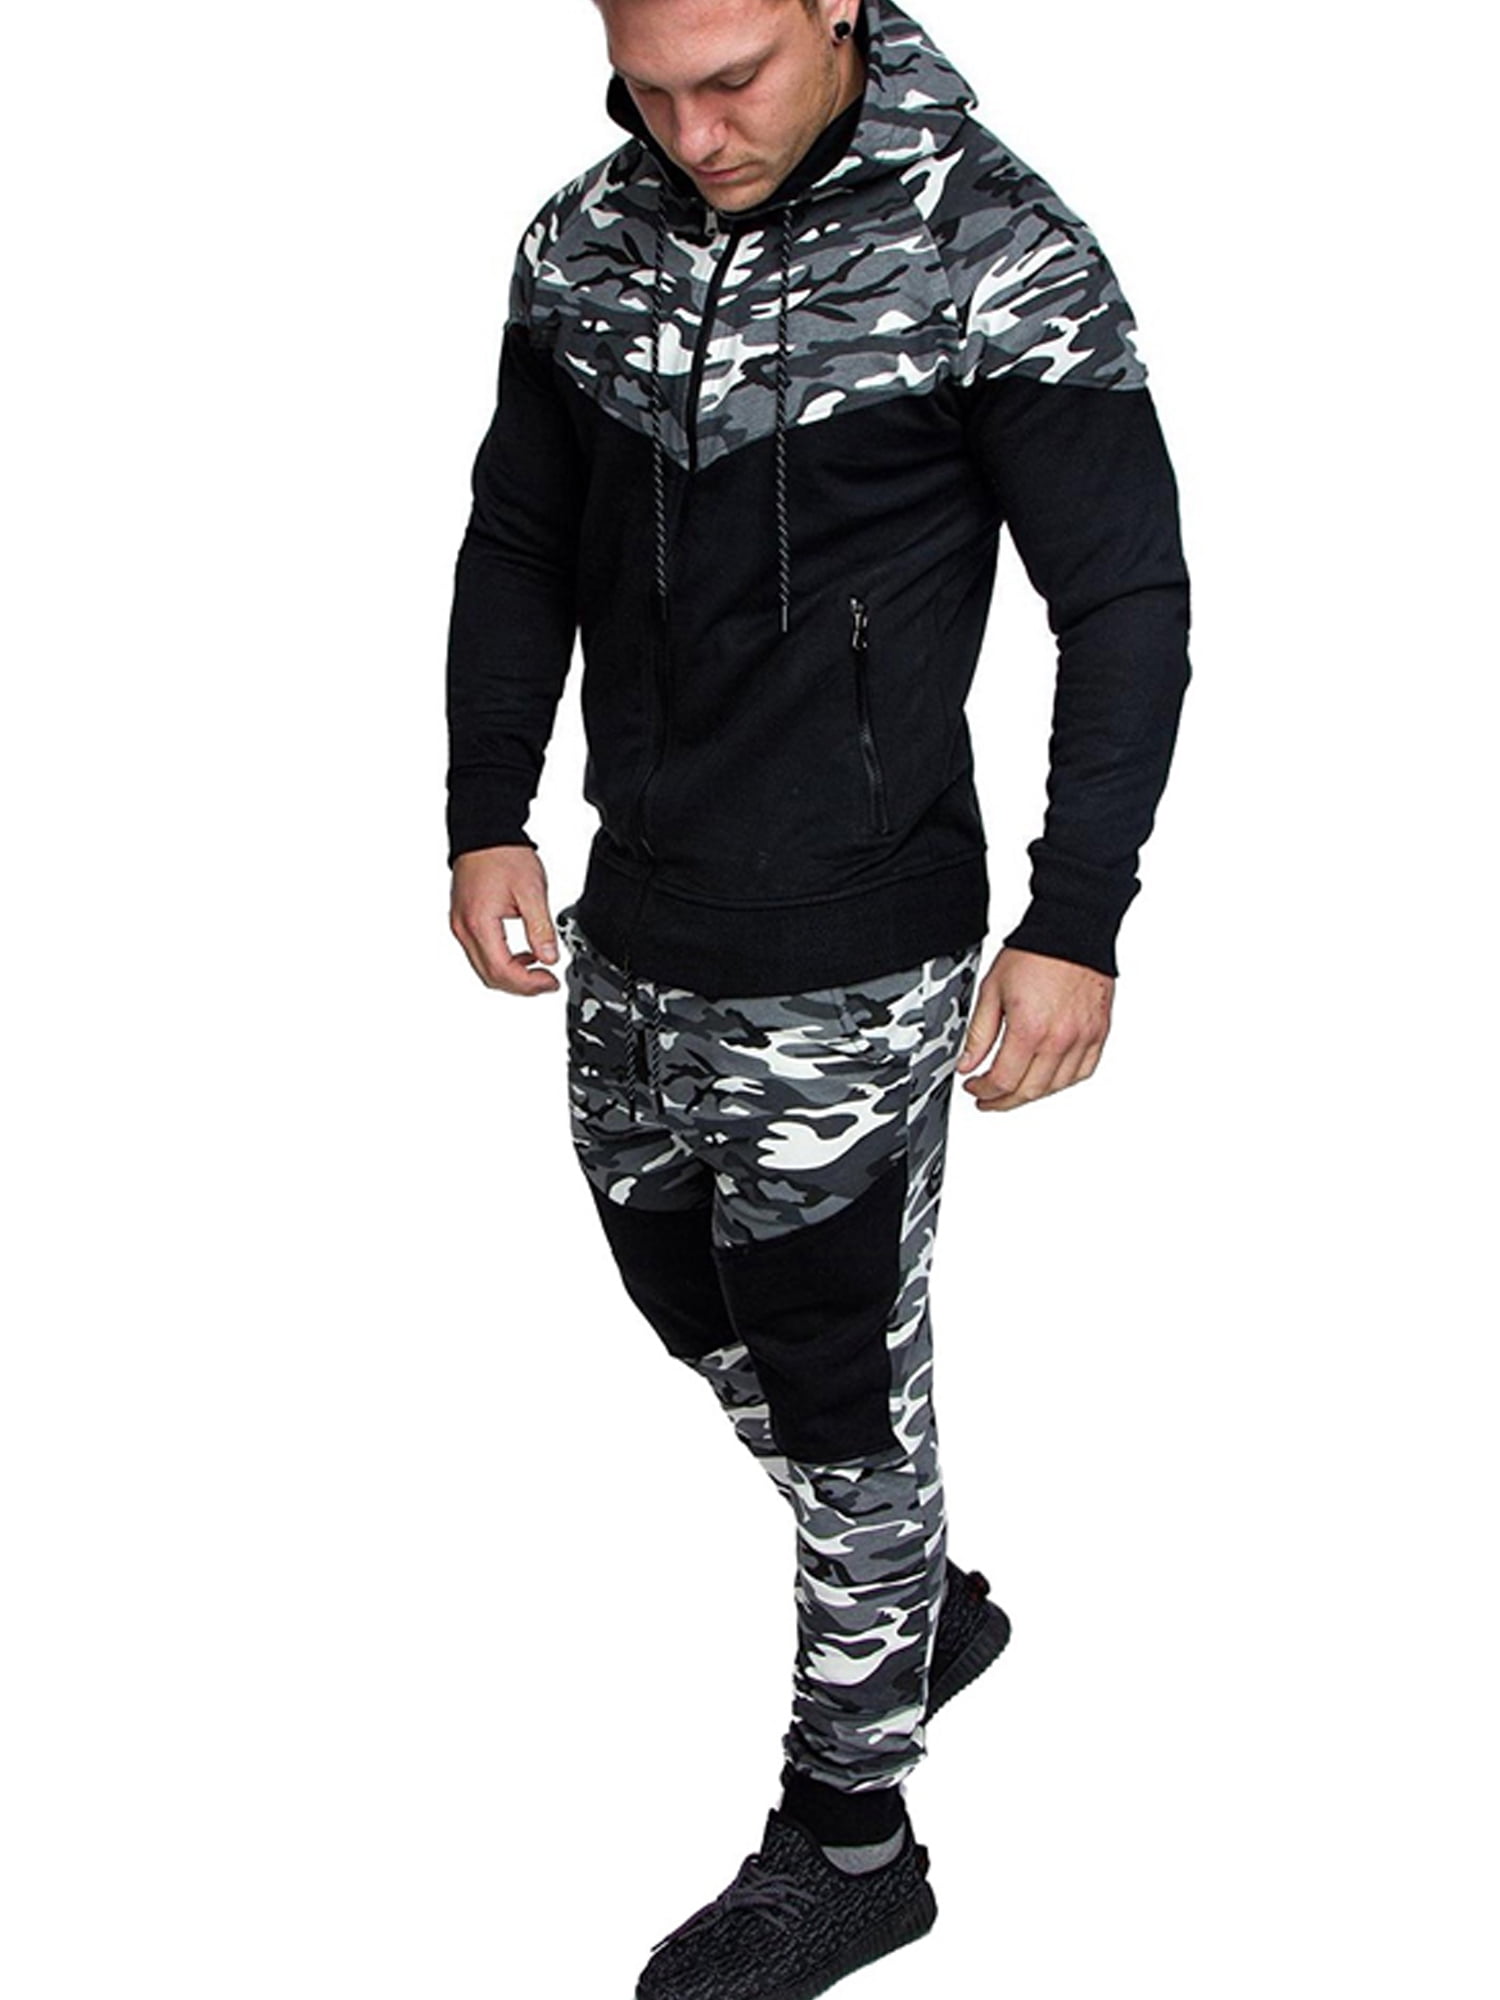 Hakjay Men's Hiphop Dance Jogger Casual Tracksuit Set Long Sleeve Full-Zip Running Jogging Athletic Sweat Suits 